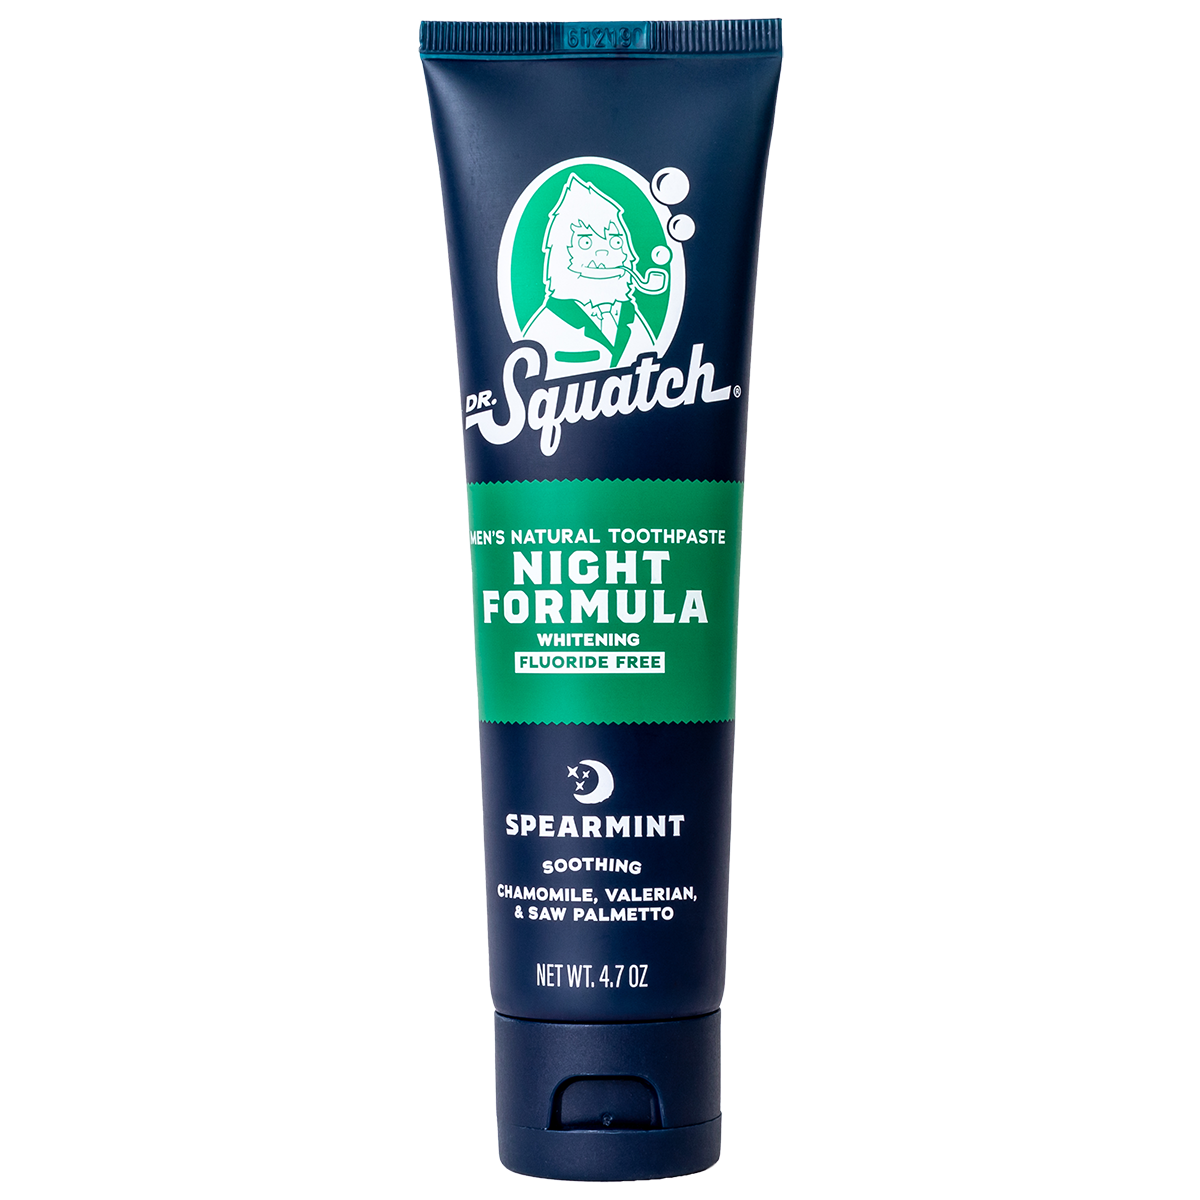 https://cdn.shopify.com/s/files/1/0275/7784/3817/products/2021_Q2_DrSquatch_ProductPhotos_Toothpaste_IMG_6085.png?v=1636391995